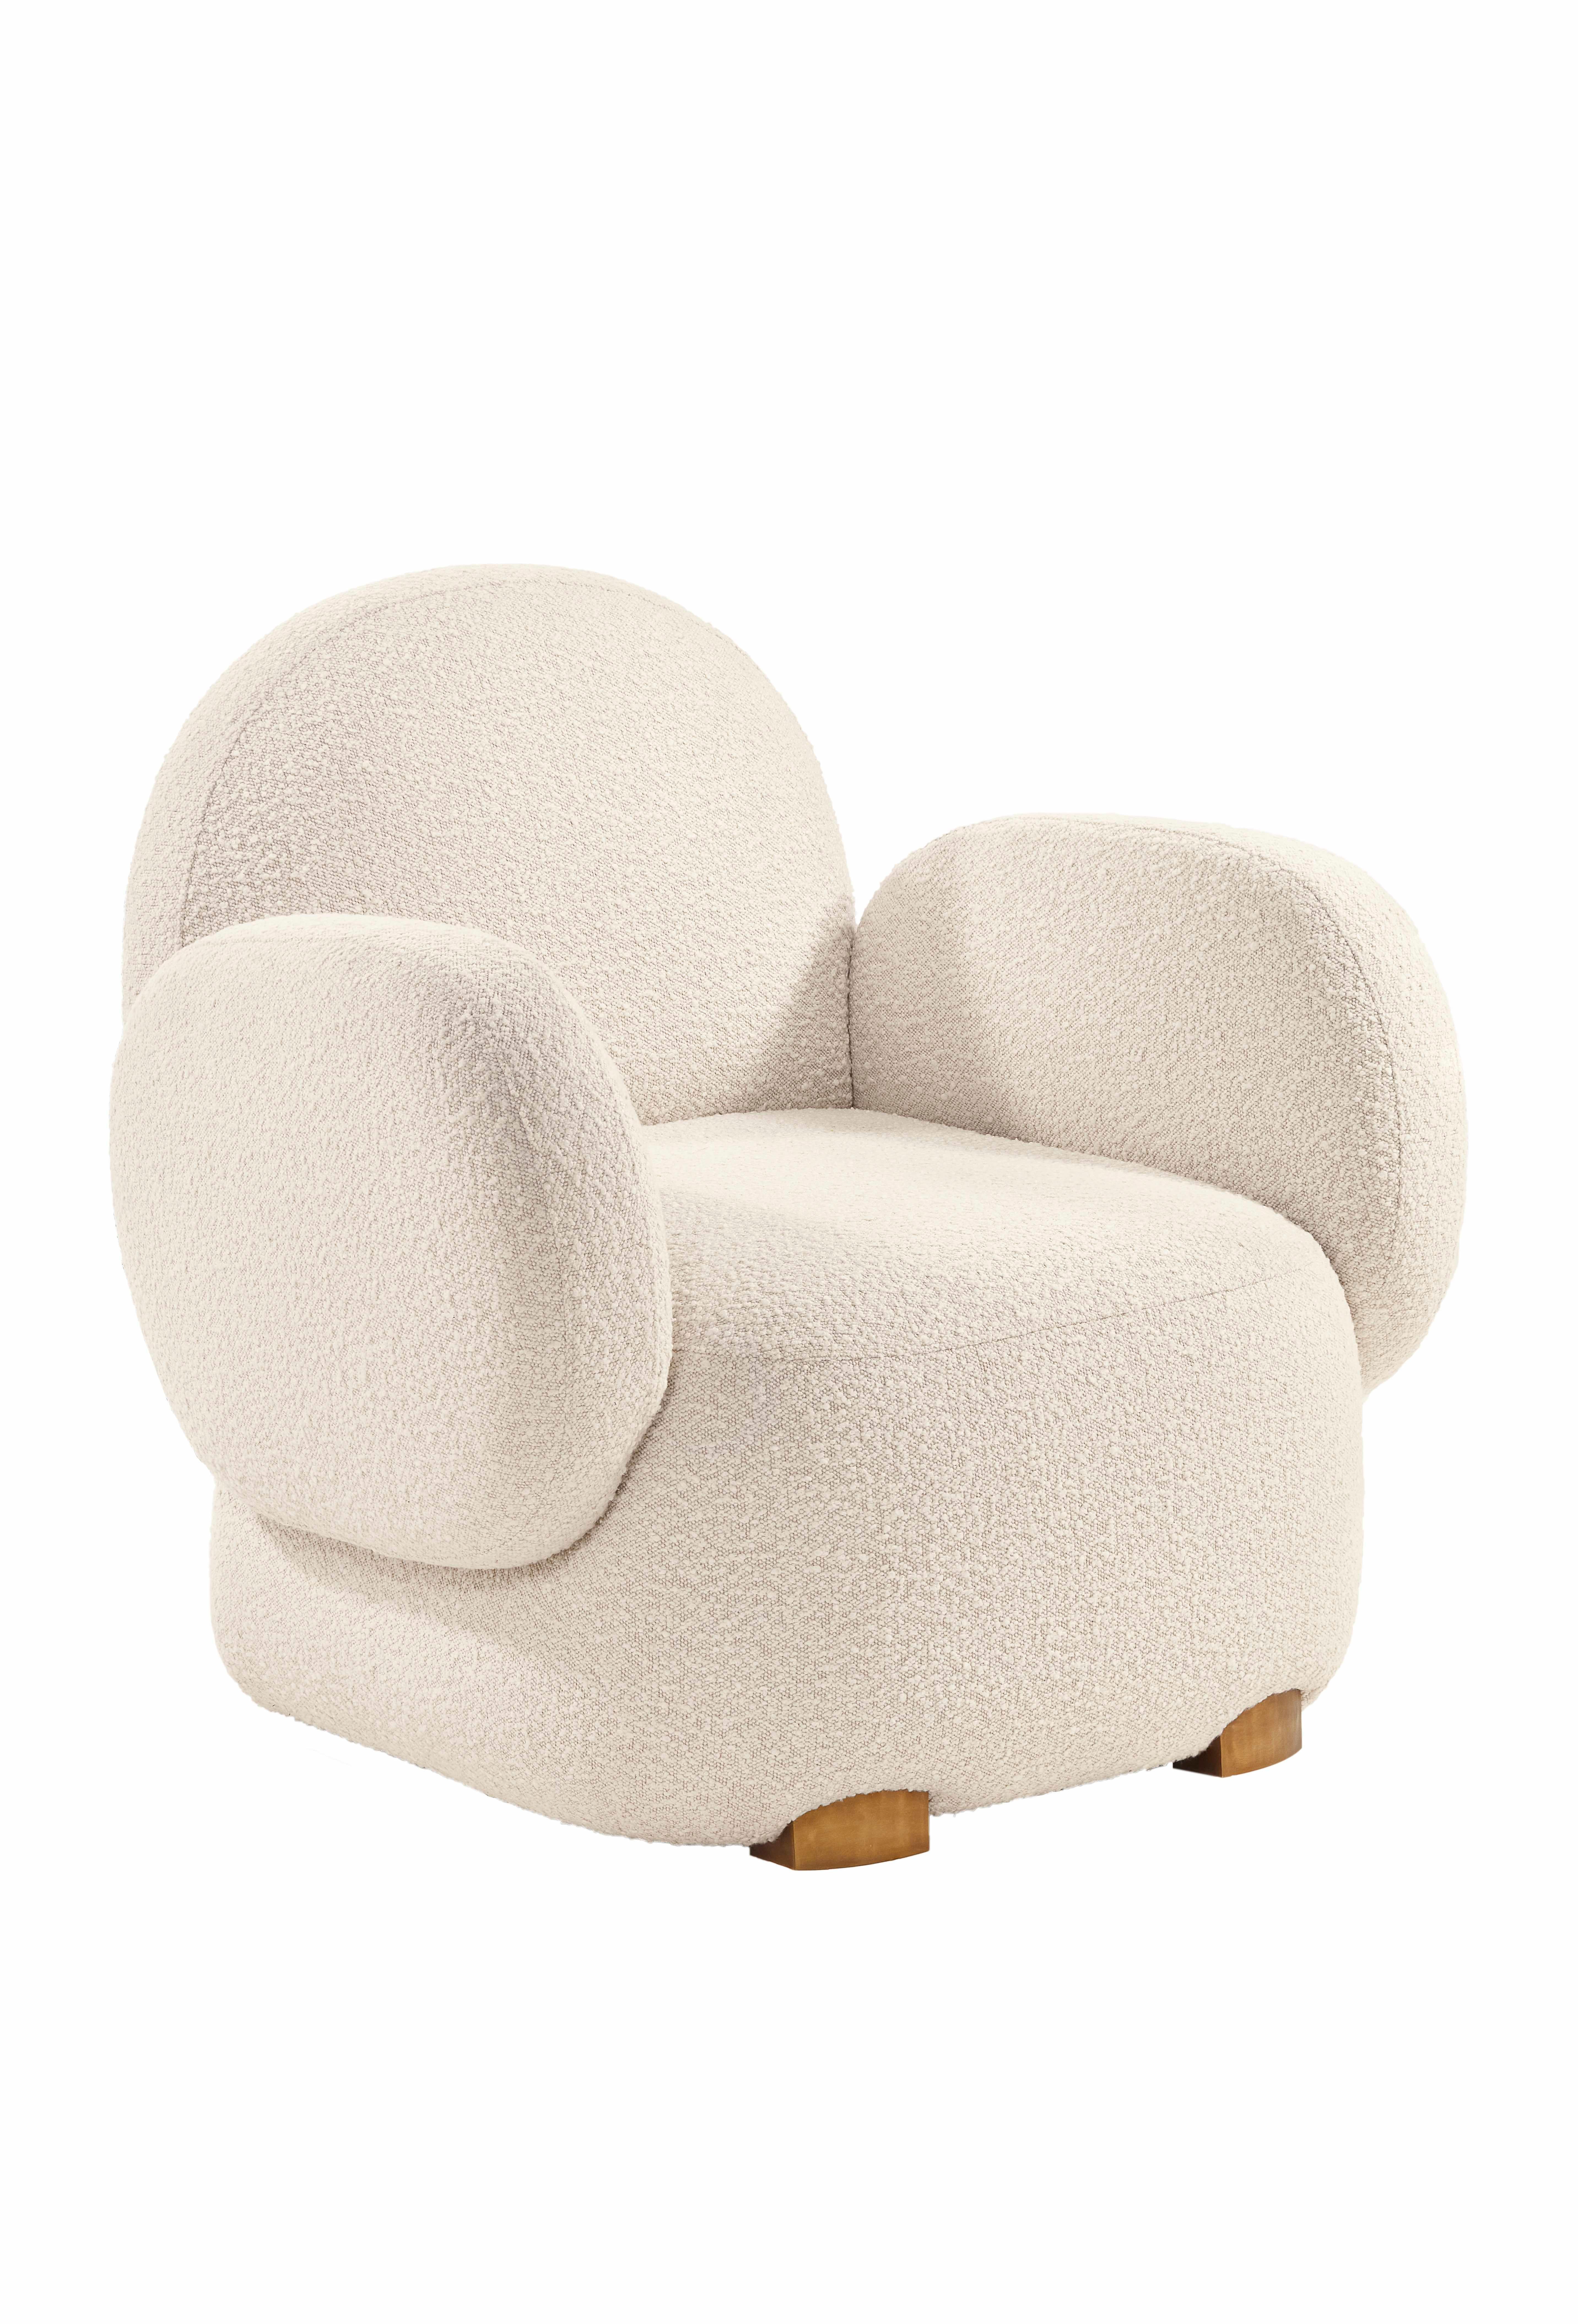 Dolce armchair ivory is an exquisite single-seater sofa, which can be used on
its own or with the Dolce Sofa. It is upholstered in plush ivory boucle fabric, ideal
or playful lazing! Designed by Matteo Cibic

Have you heard of Matteoverse?
It's